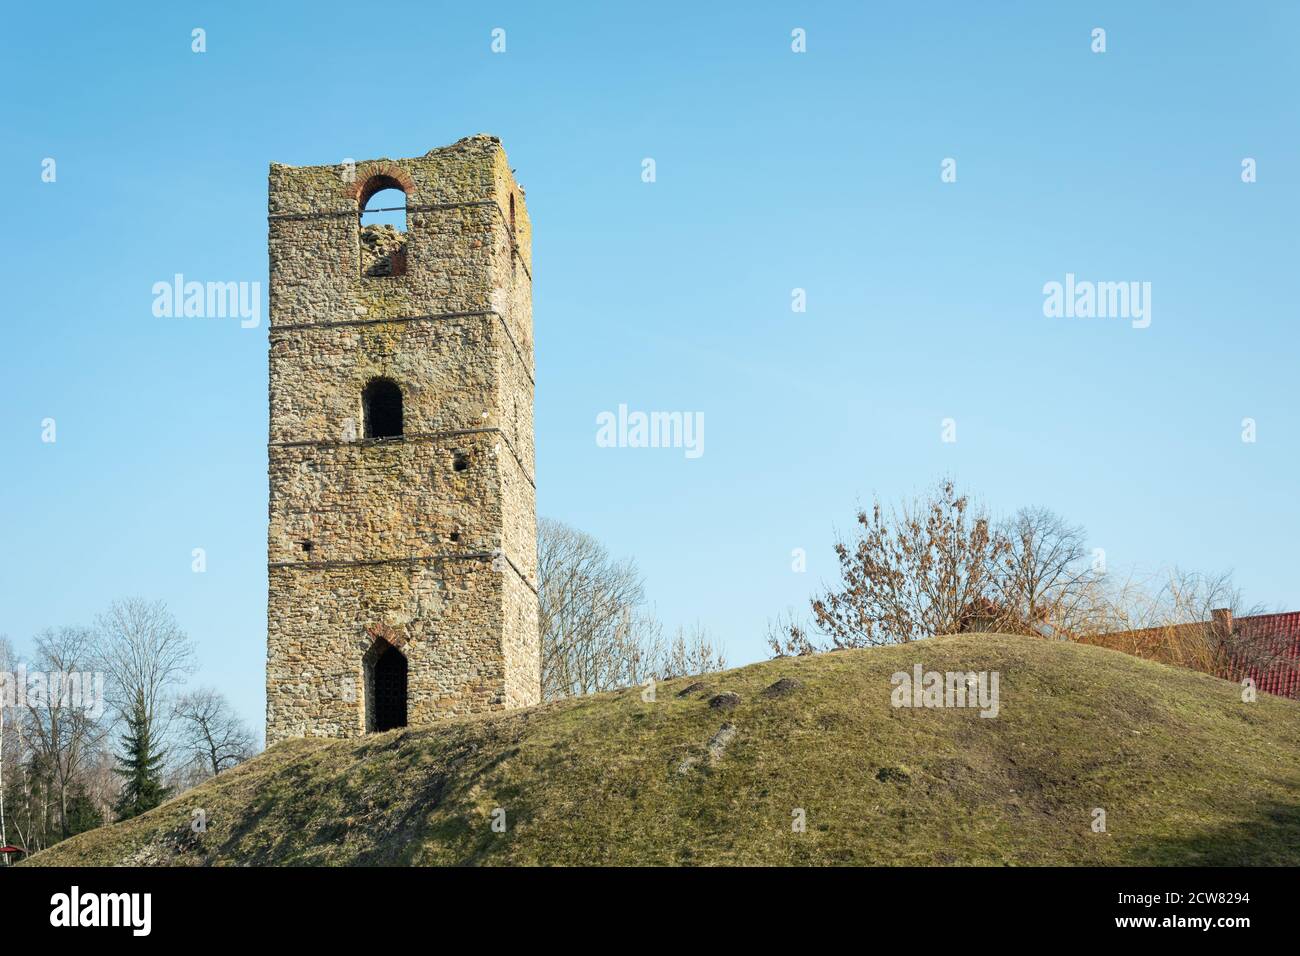 Stolpie, Lubelskie, Poland - February 17, 2019: Medieval tower in Stolpie Stock Photo